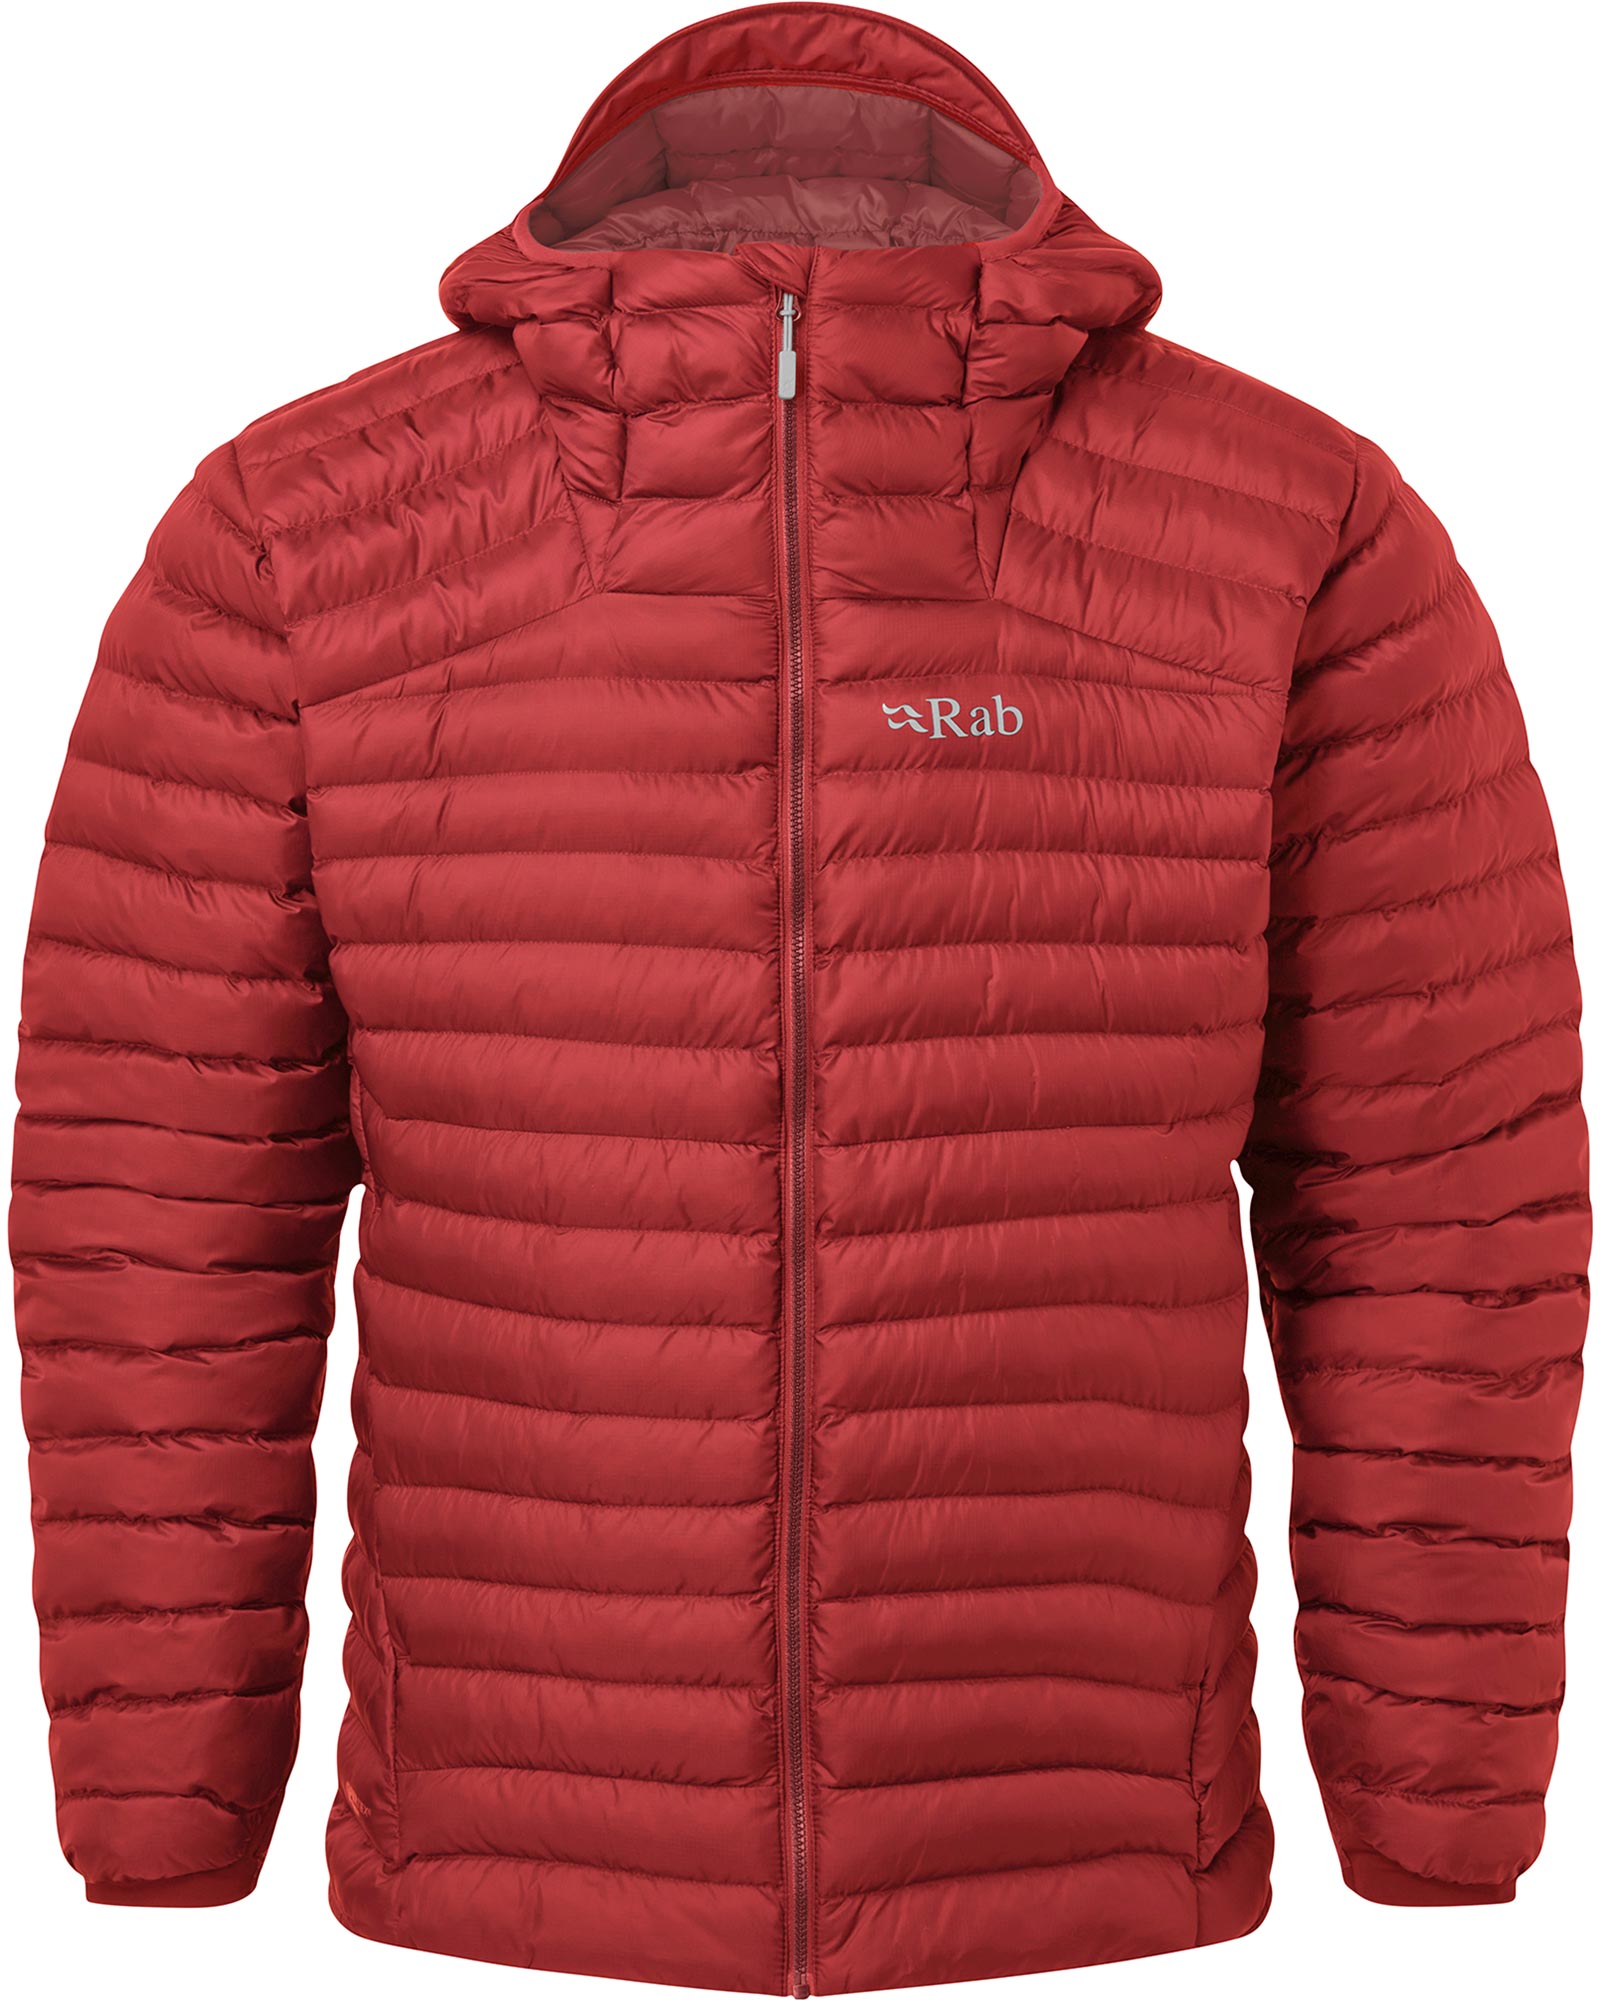 Rab Cirrus Alpine Men’s Insulated Jacket - Ascent Red XL